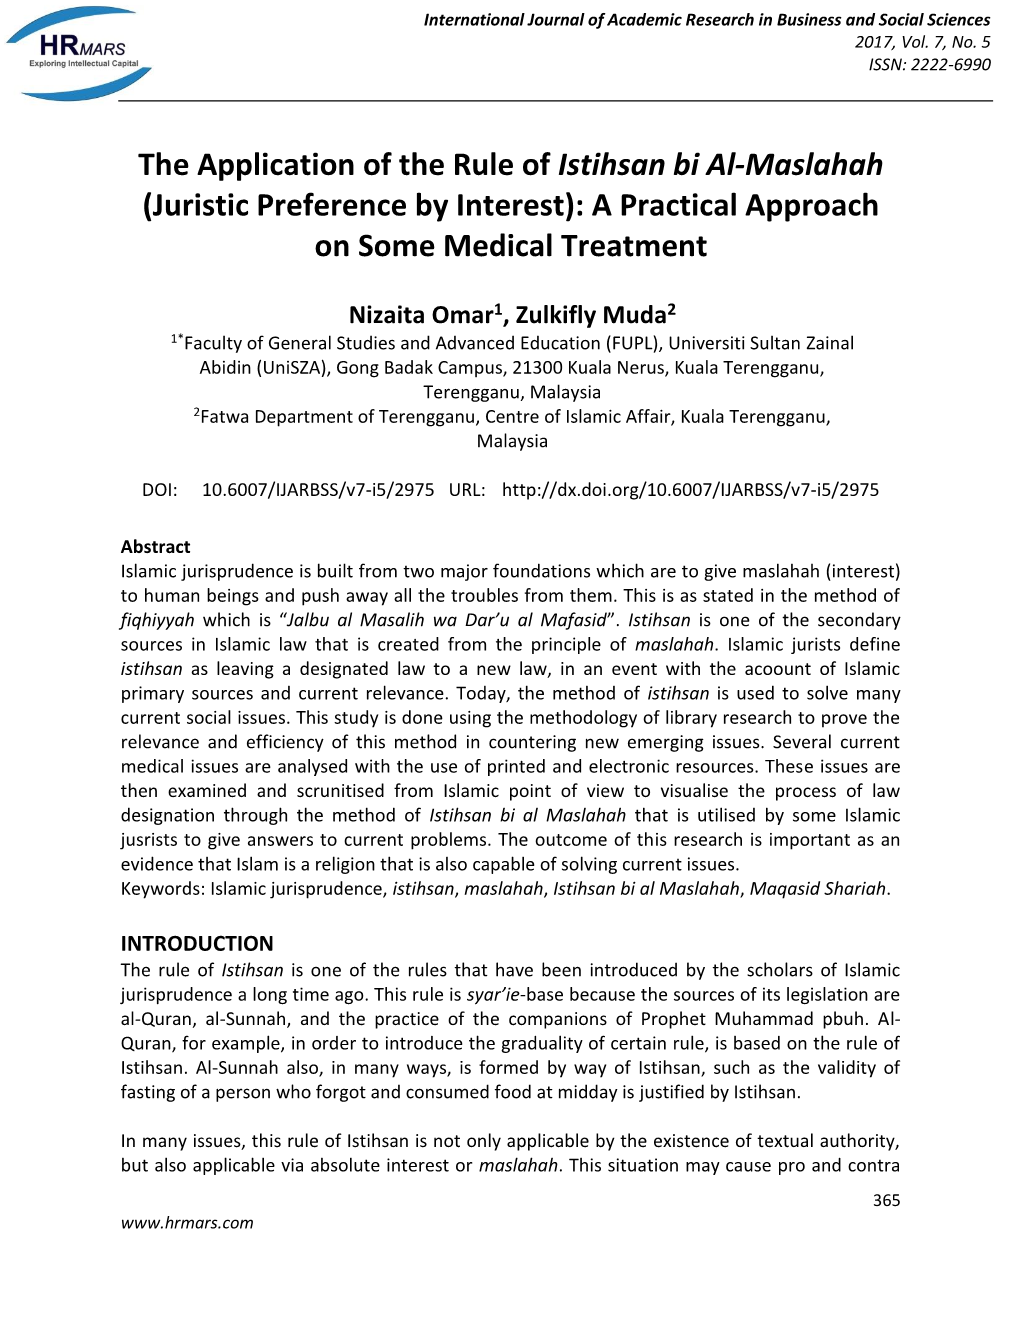 The Application of the Rule of Istihsan Bi Al-Maslahah (Juristic Preference by Interest): a Practical Approach on Some Medical Treatment